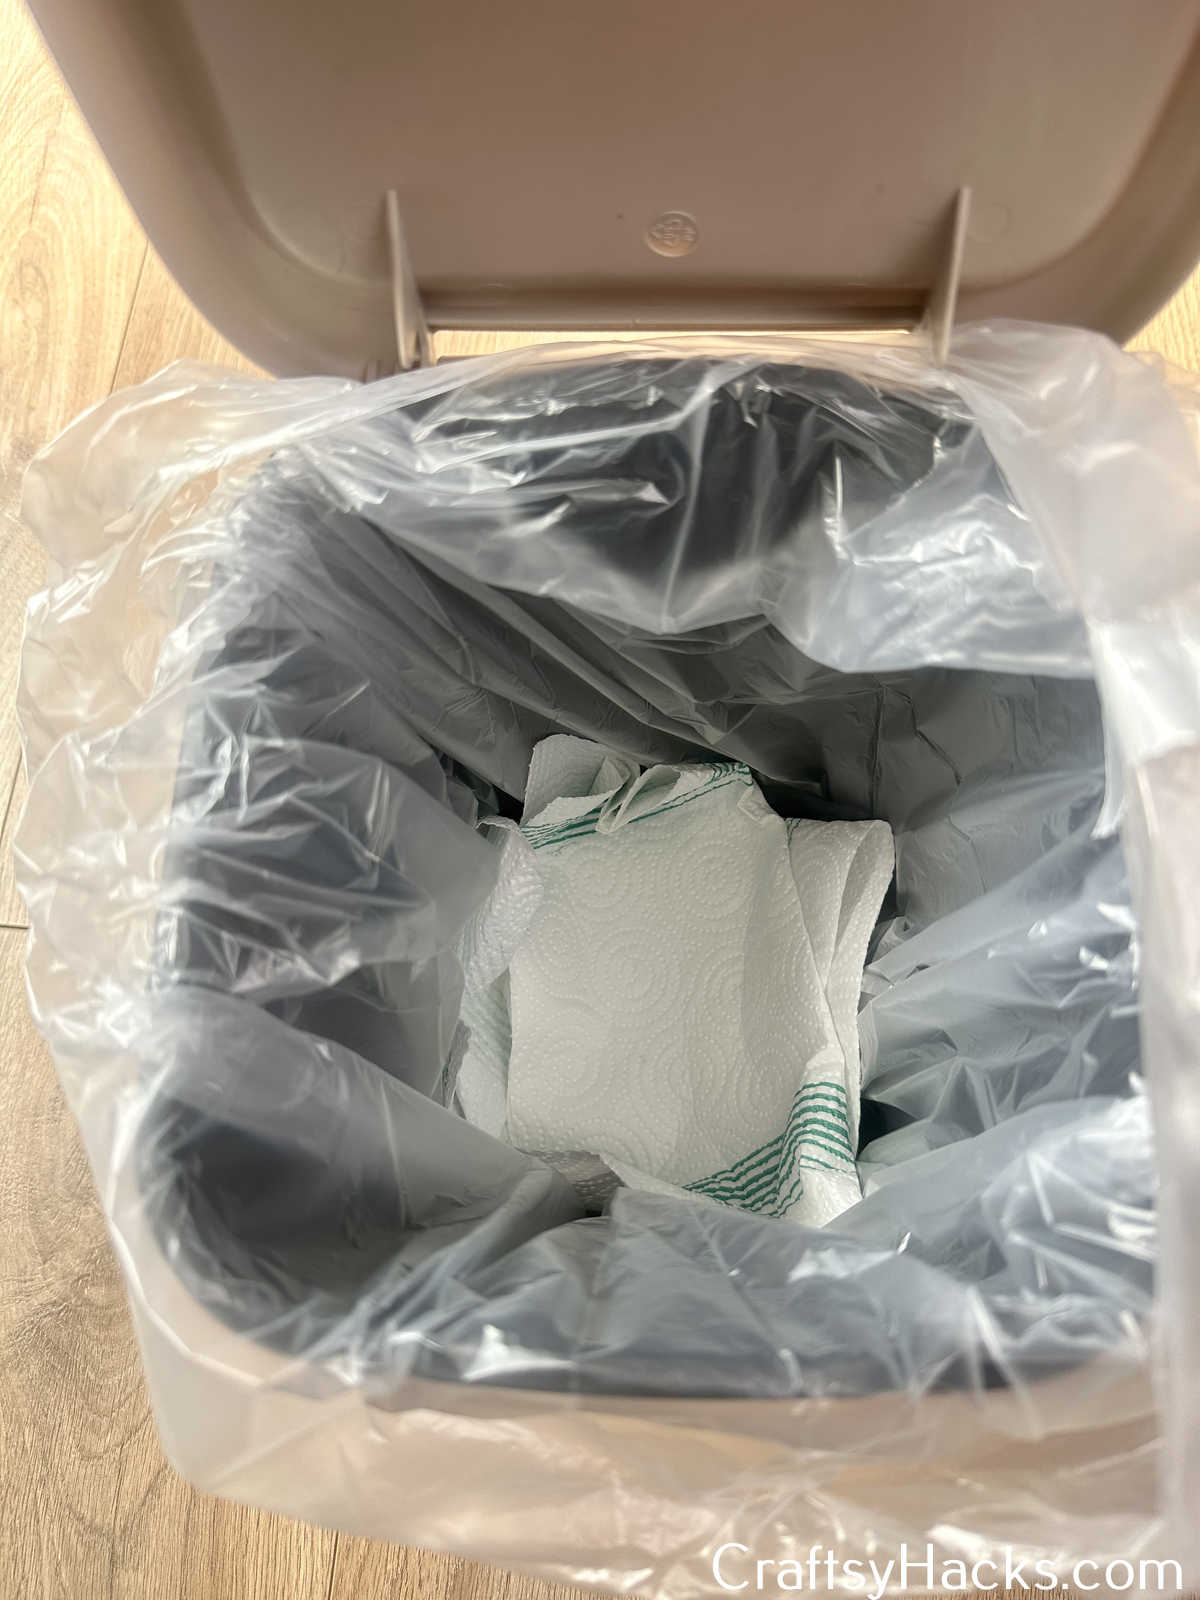 paper towels at bottom of bin to absorb liquid